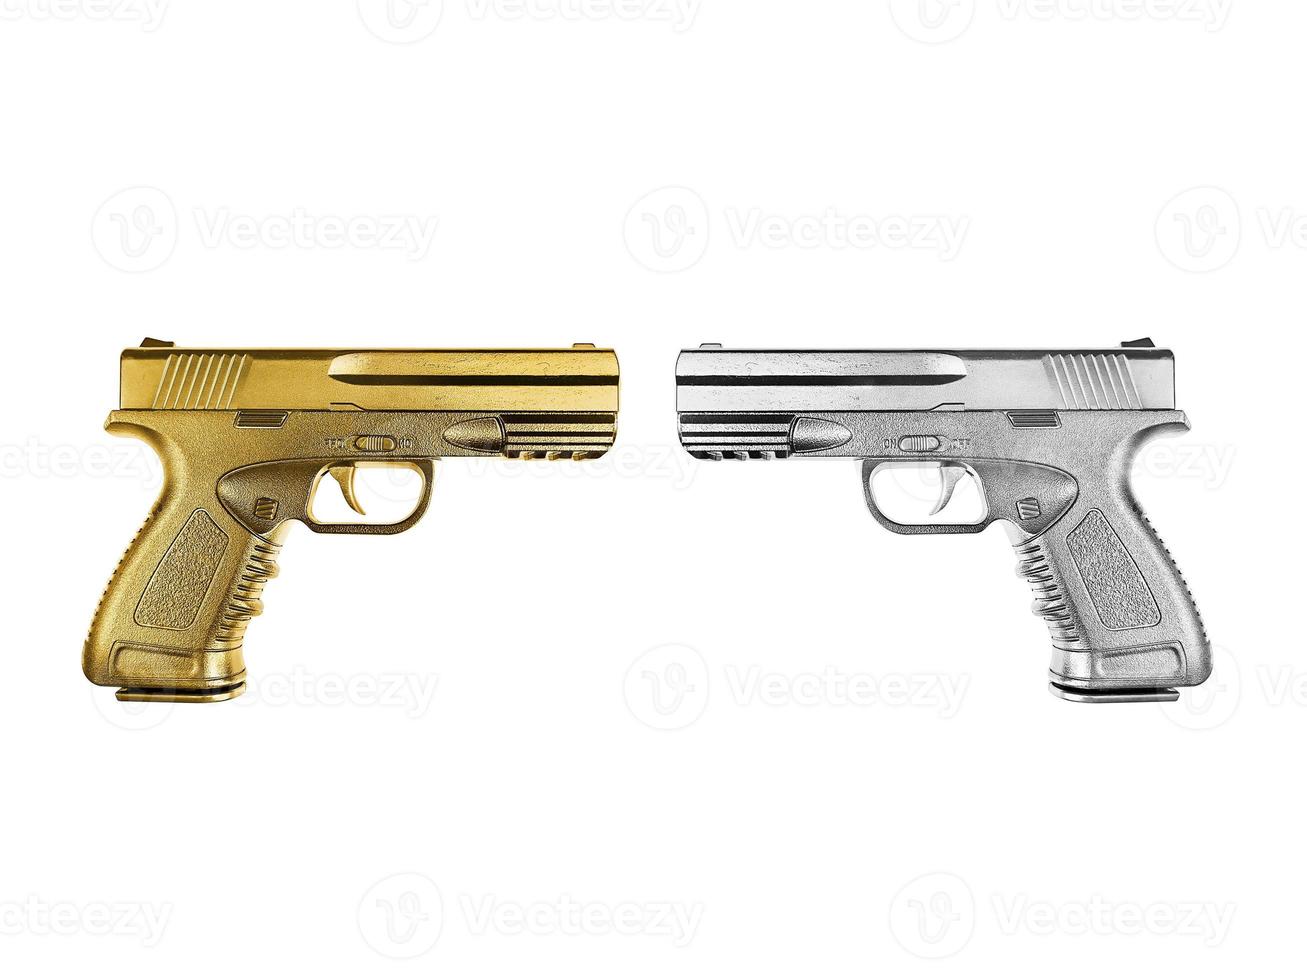 gun silver metal and gun gold metal isolated on white background2 photo